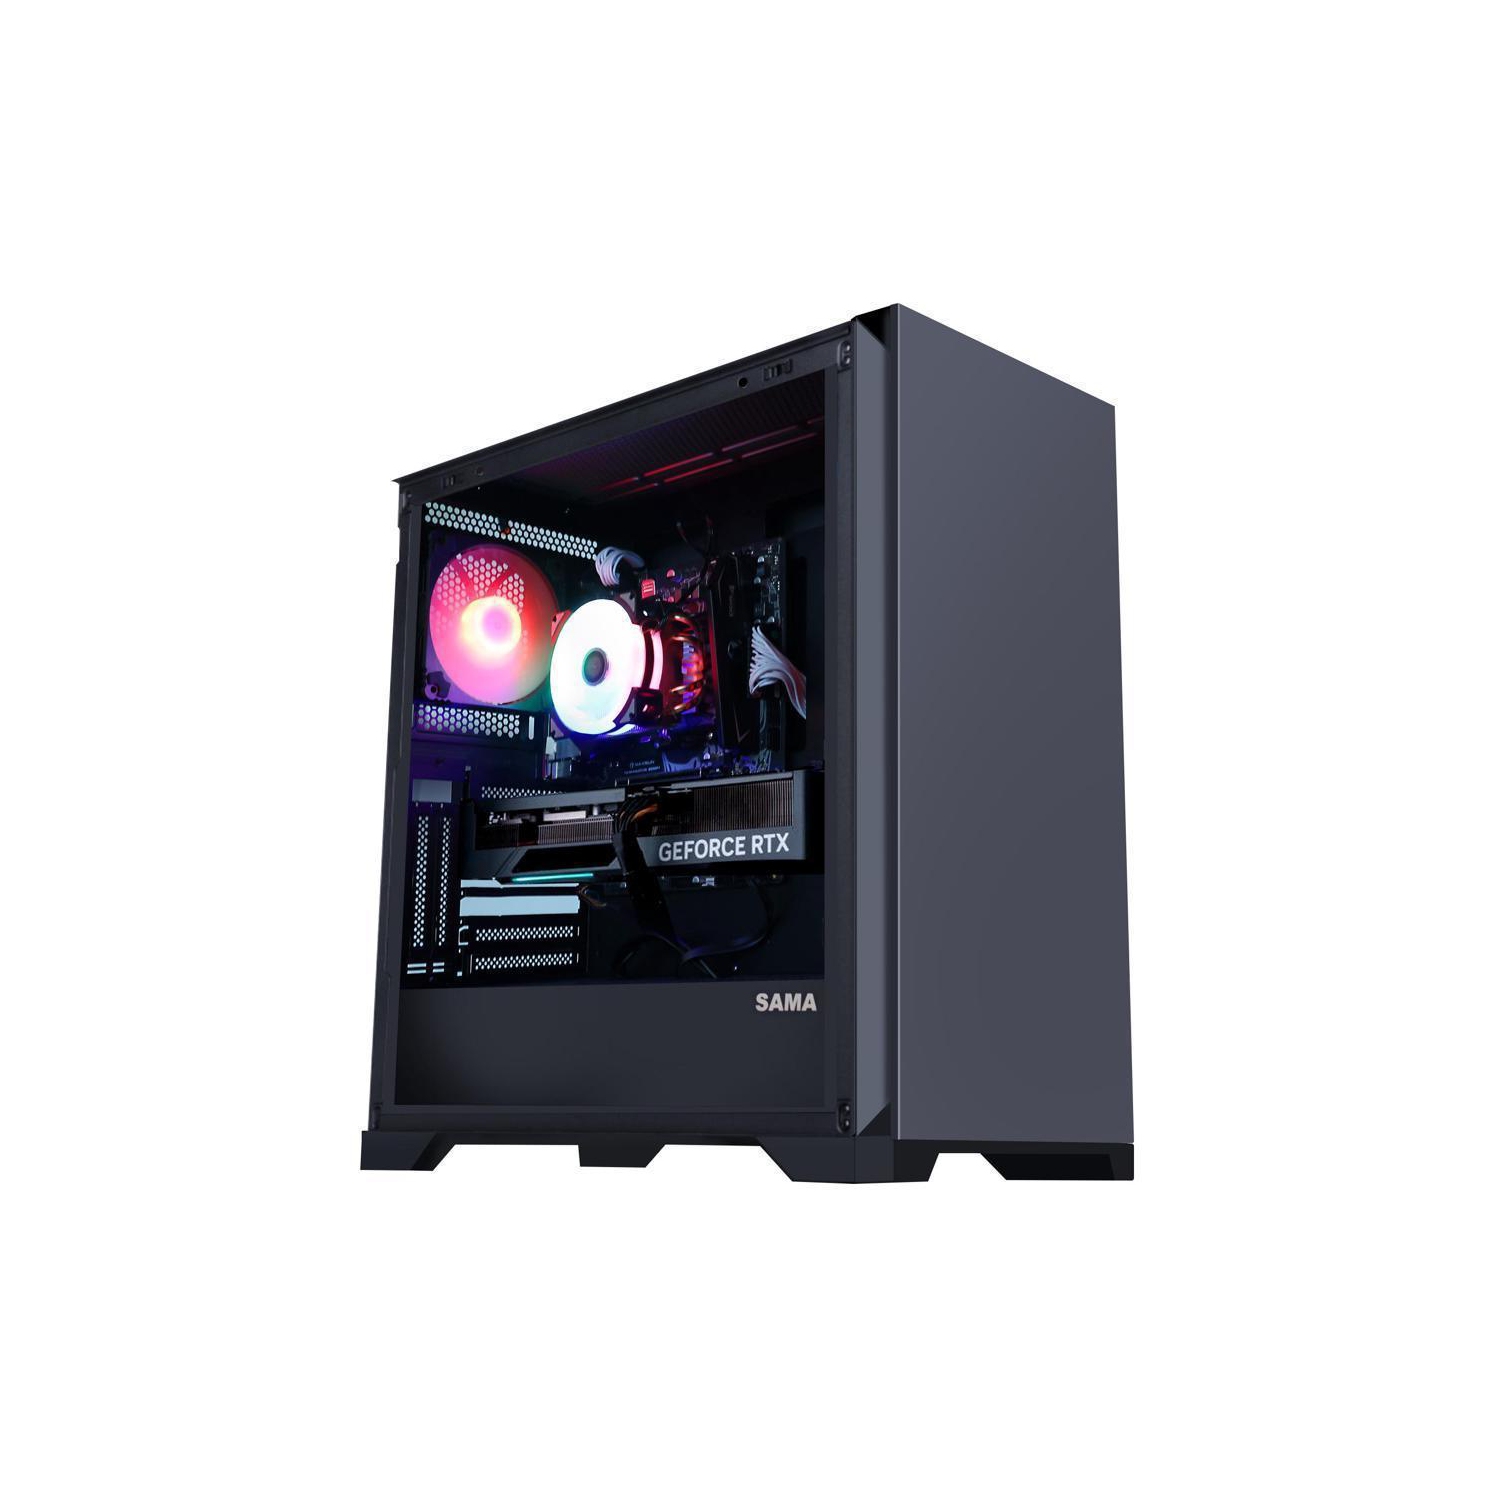 Hoengager Ares Gaming - Intel Core i5-12400F 6-Core 2.5 GHz- RX 6750 XT 12G - 16GB DDR4 3200MHz - 500GB M.2 + 1TB 2.5'' SATA SSD- WIFI -RGB Fans - Windows 11 Pro Computer